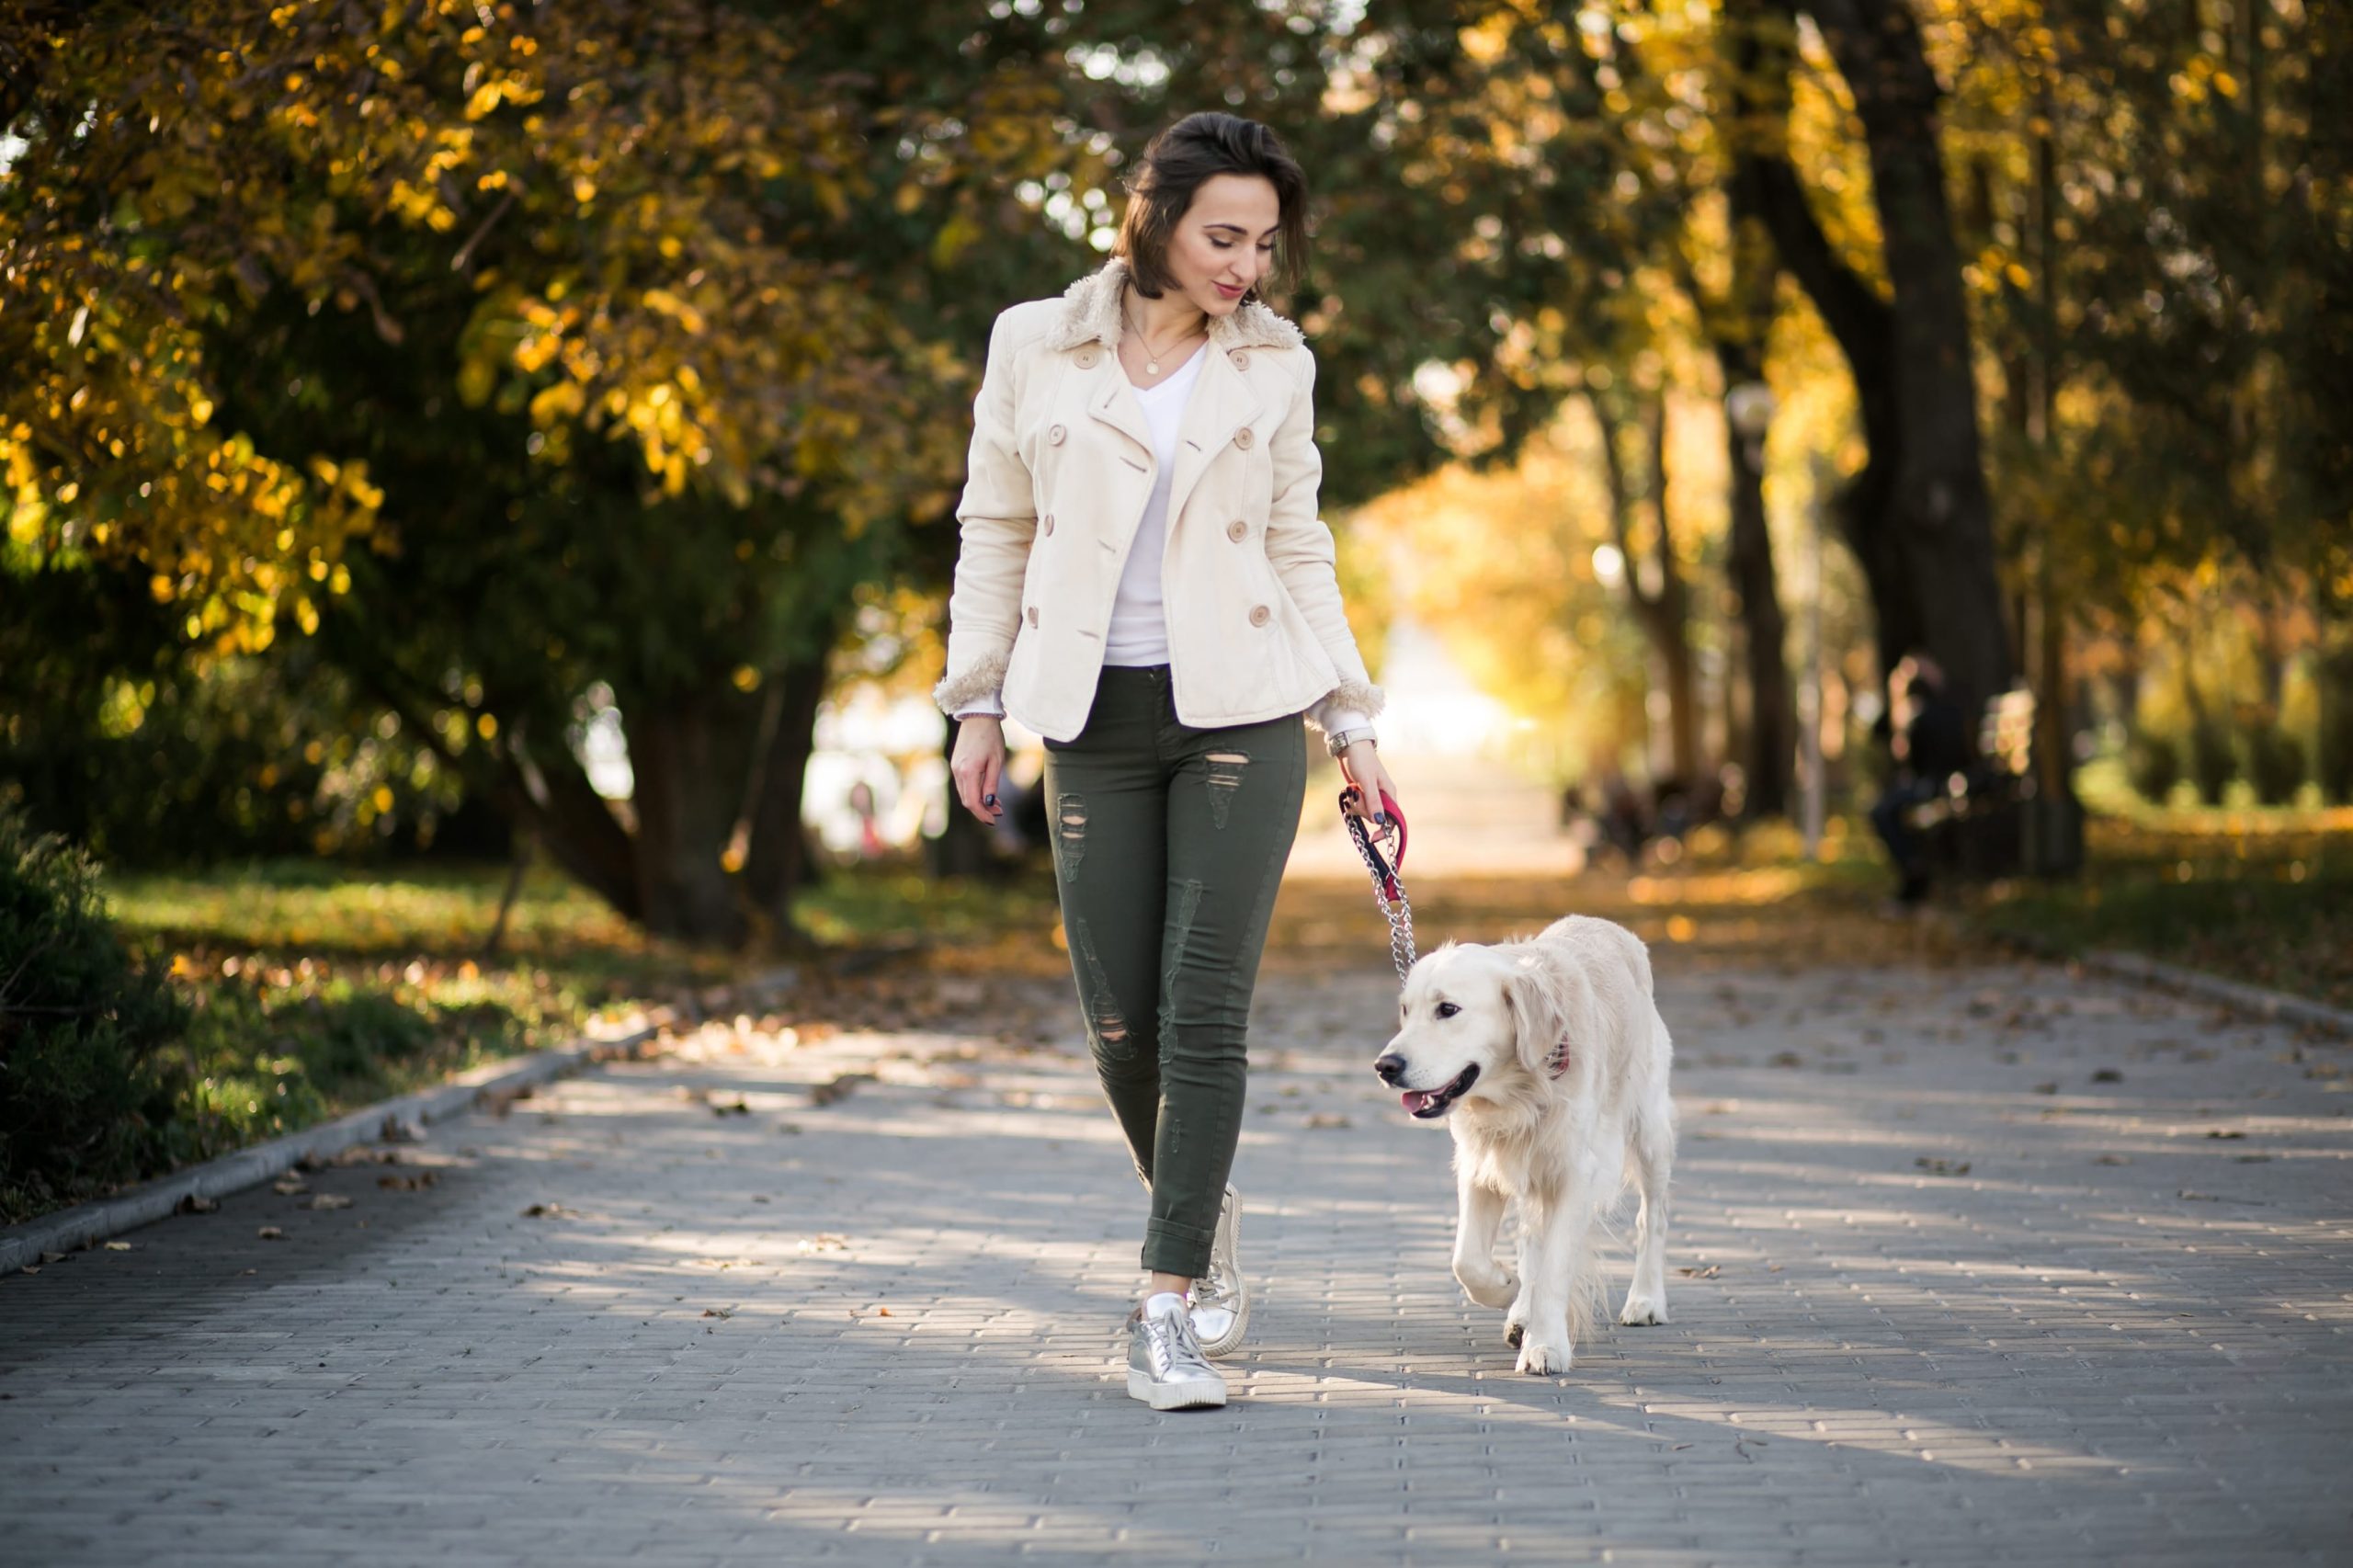 Wag caregiver takes a dog for a walk